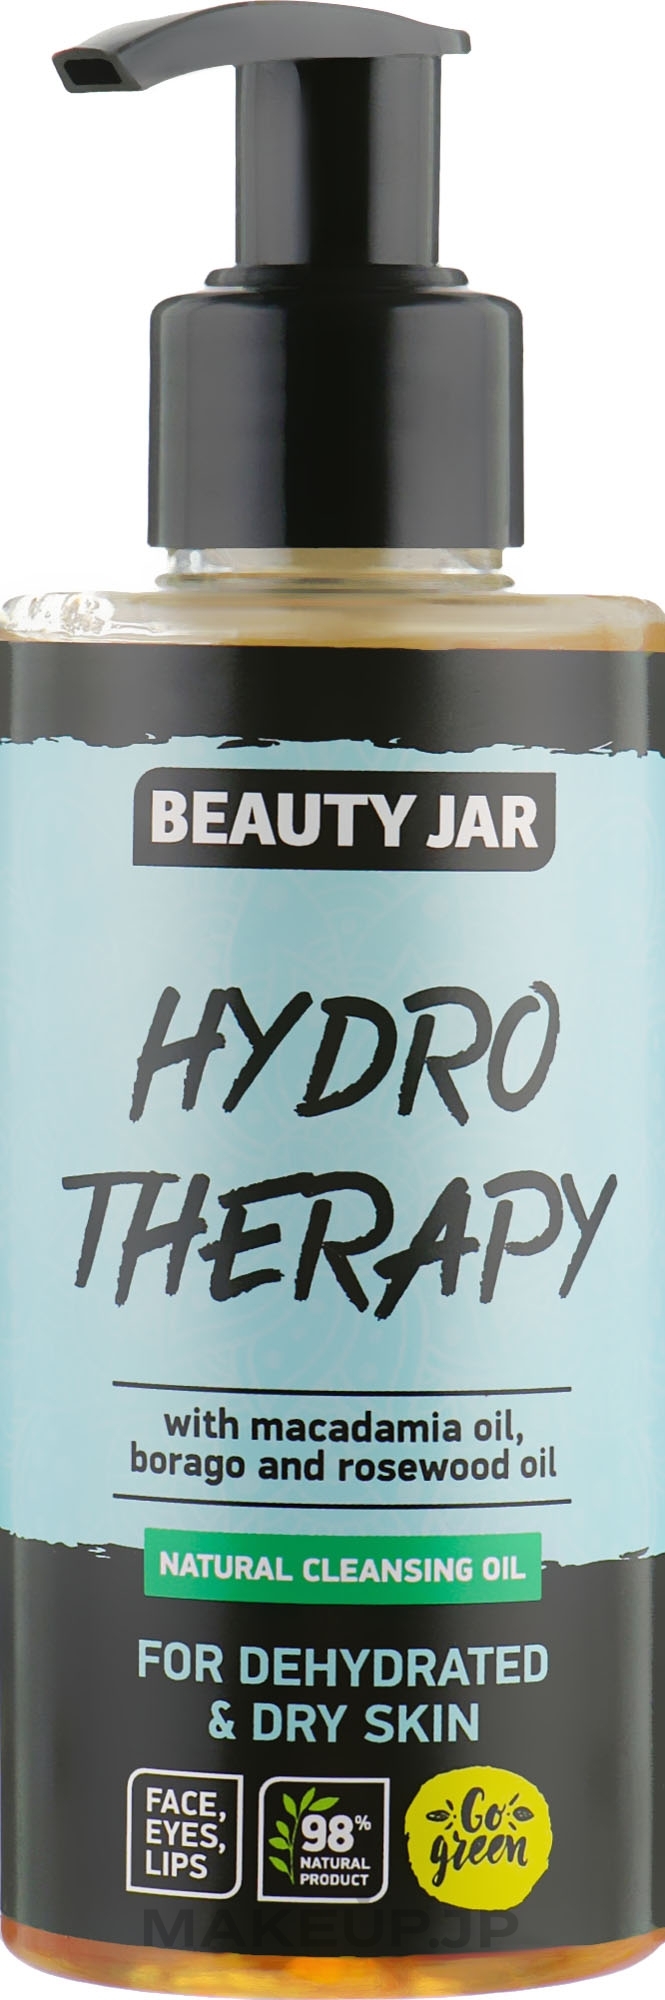 Hydro Therapy Facial Cleansing Oil for Dehydrated Skin - Beauty Jar Natural Cleansing Oil — photo 150 ml